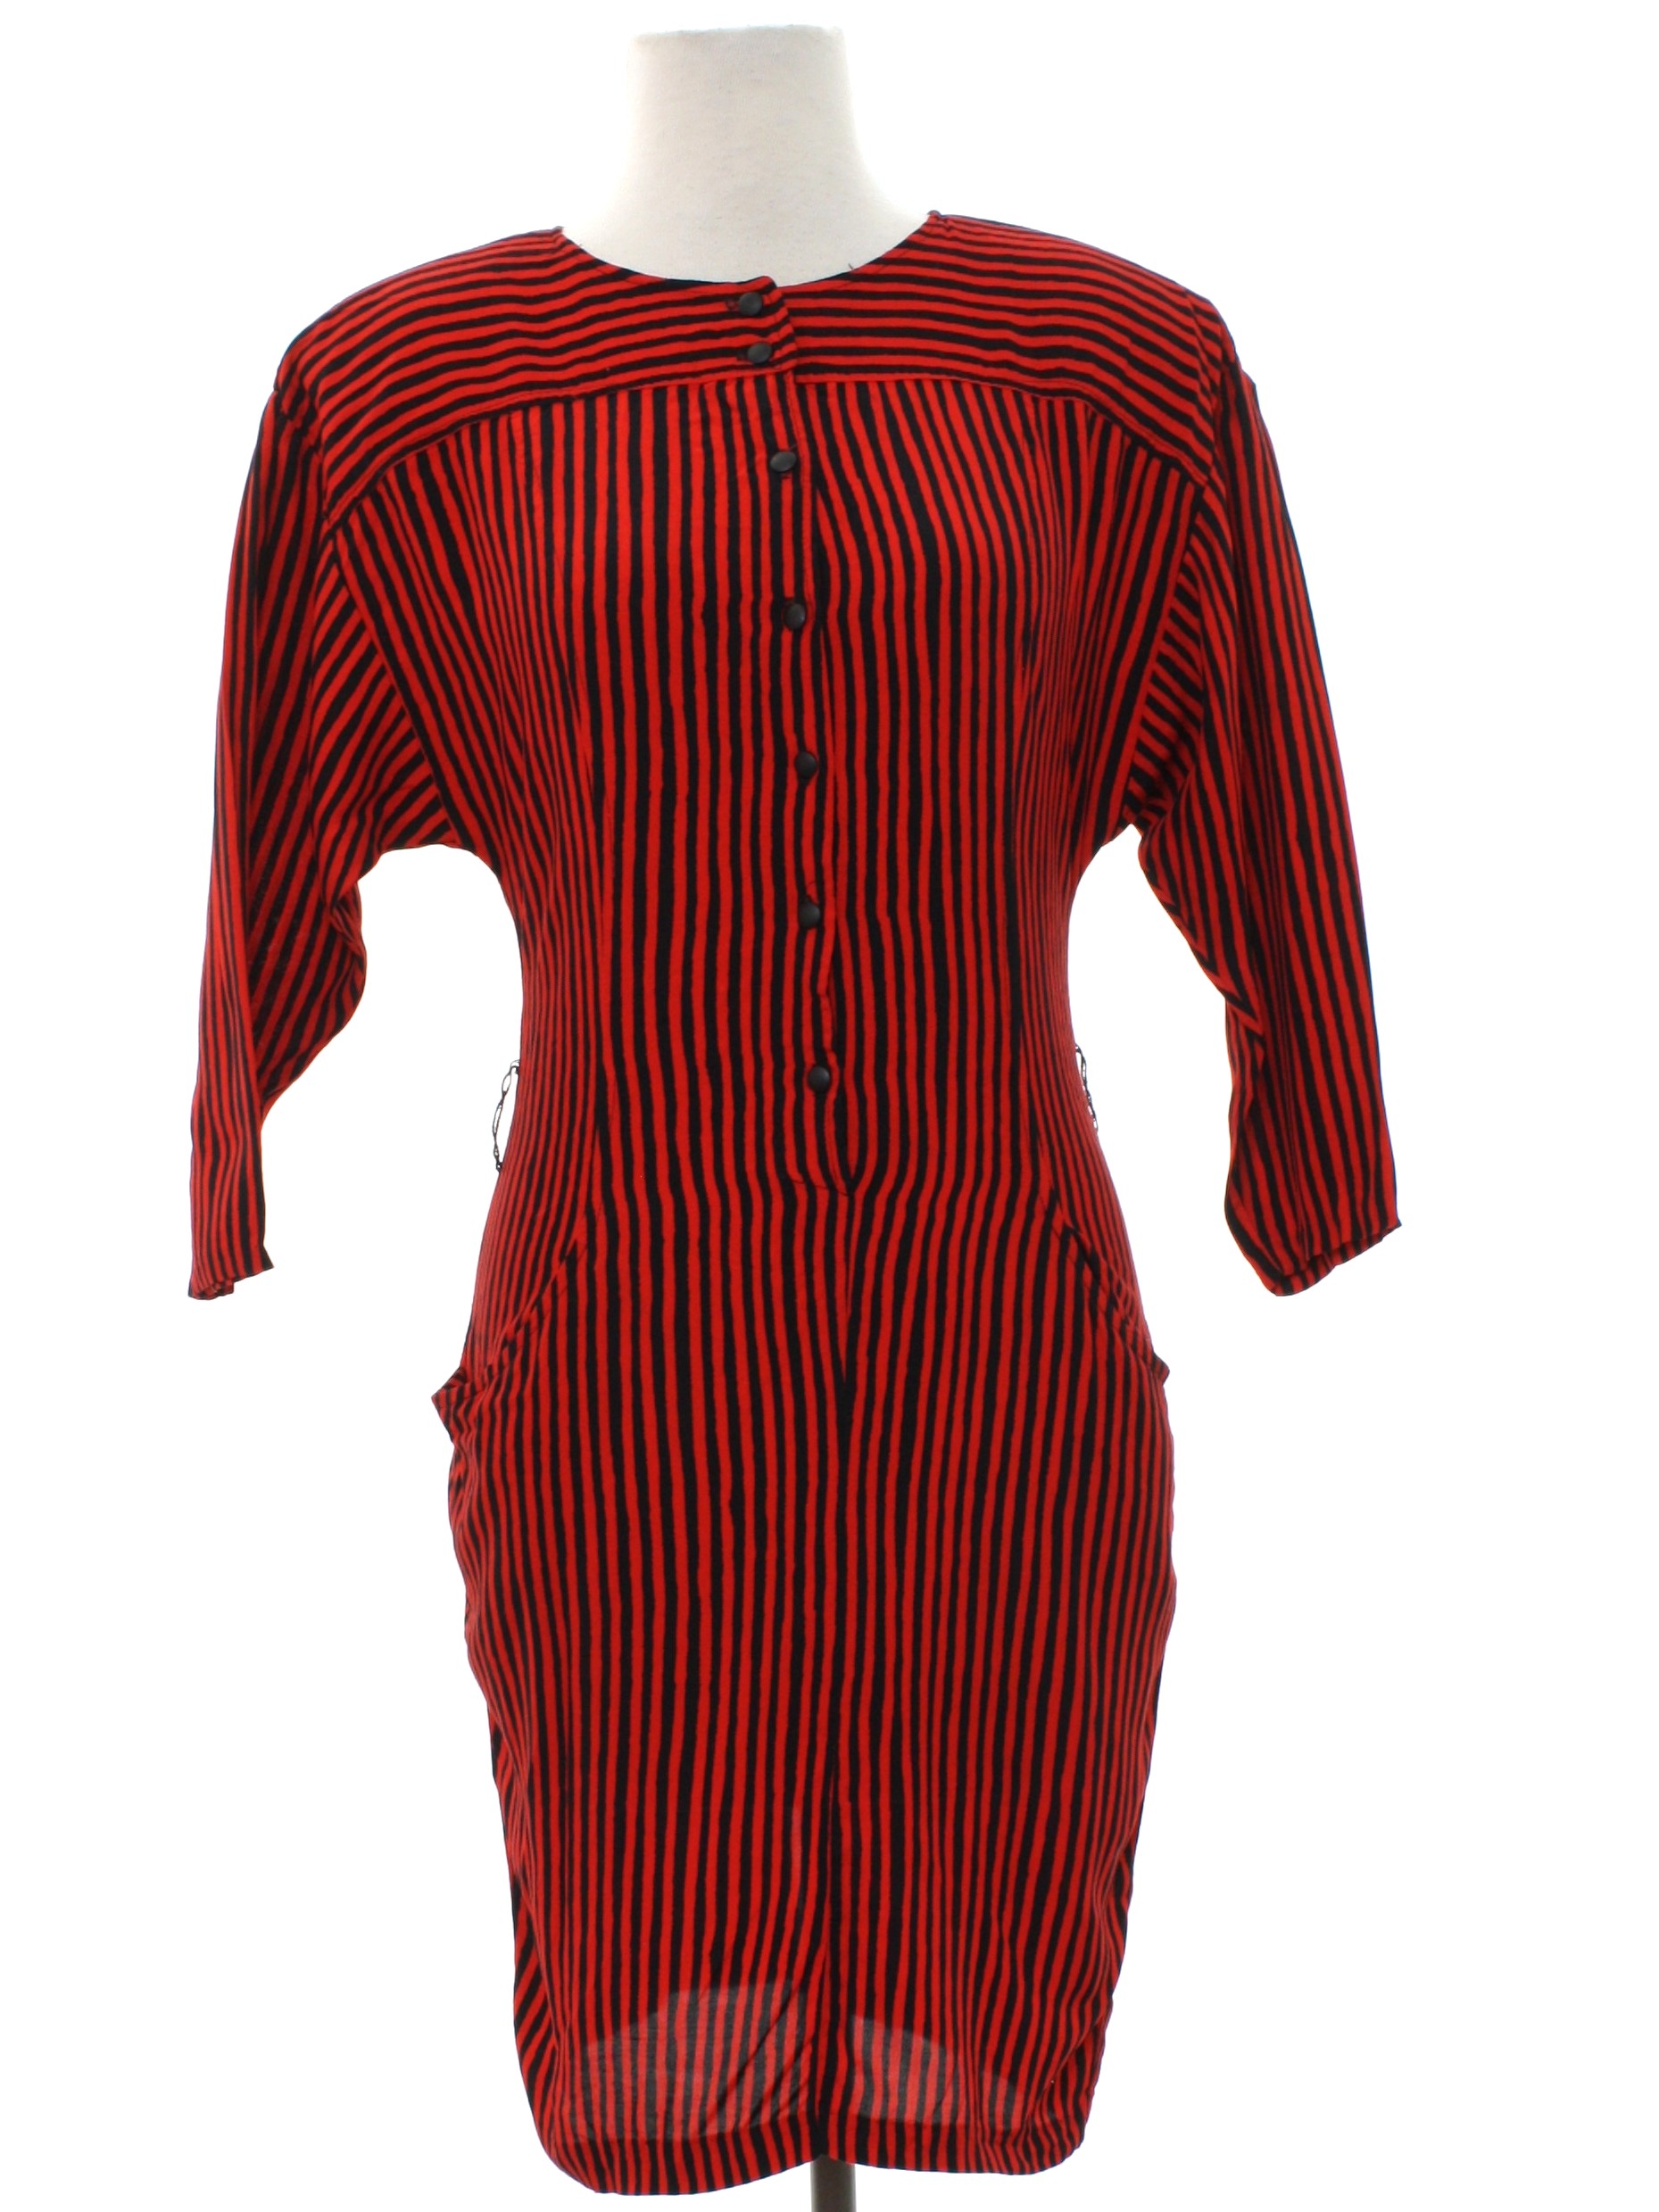 Retro 80s Dress (Contempo Casuals) : 80s -Contempo Casuals- Womens red and  black striped background rayon 3/4 length dolman sleeve Totally 80s above  the knee length dress. Round neckline, fitted waistline. Dress